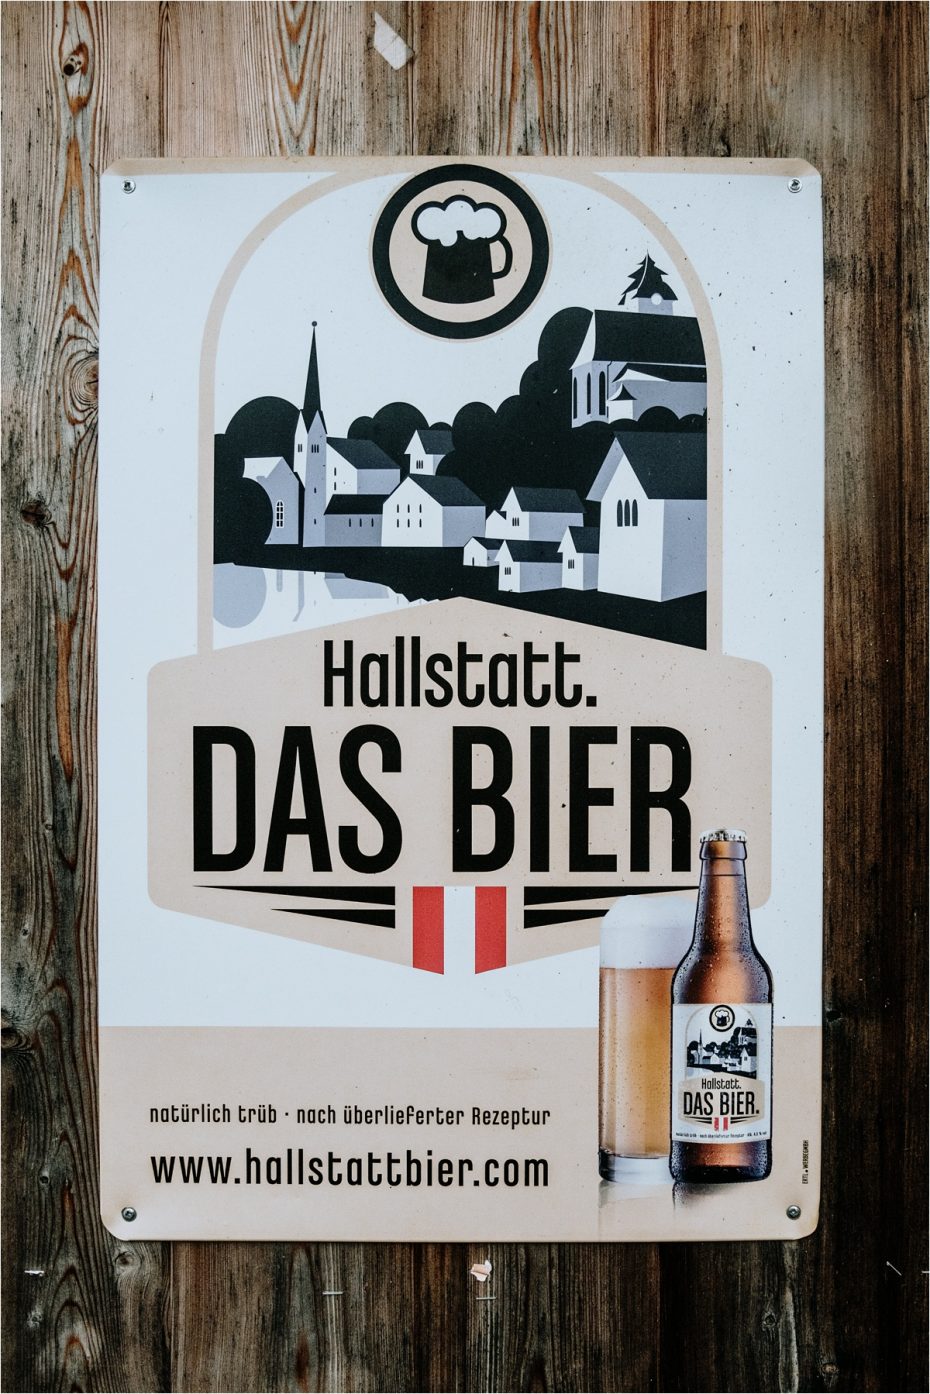 Sign for Hallstatt beer. Photos by Wild Connections Photography